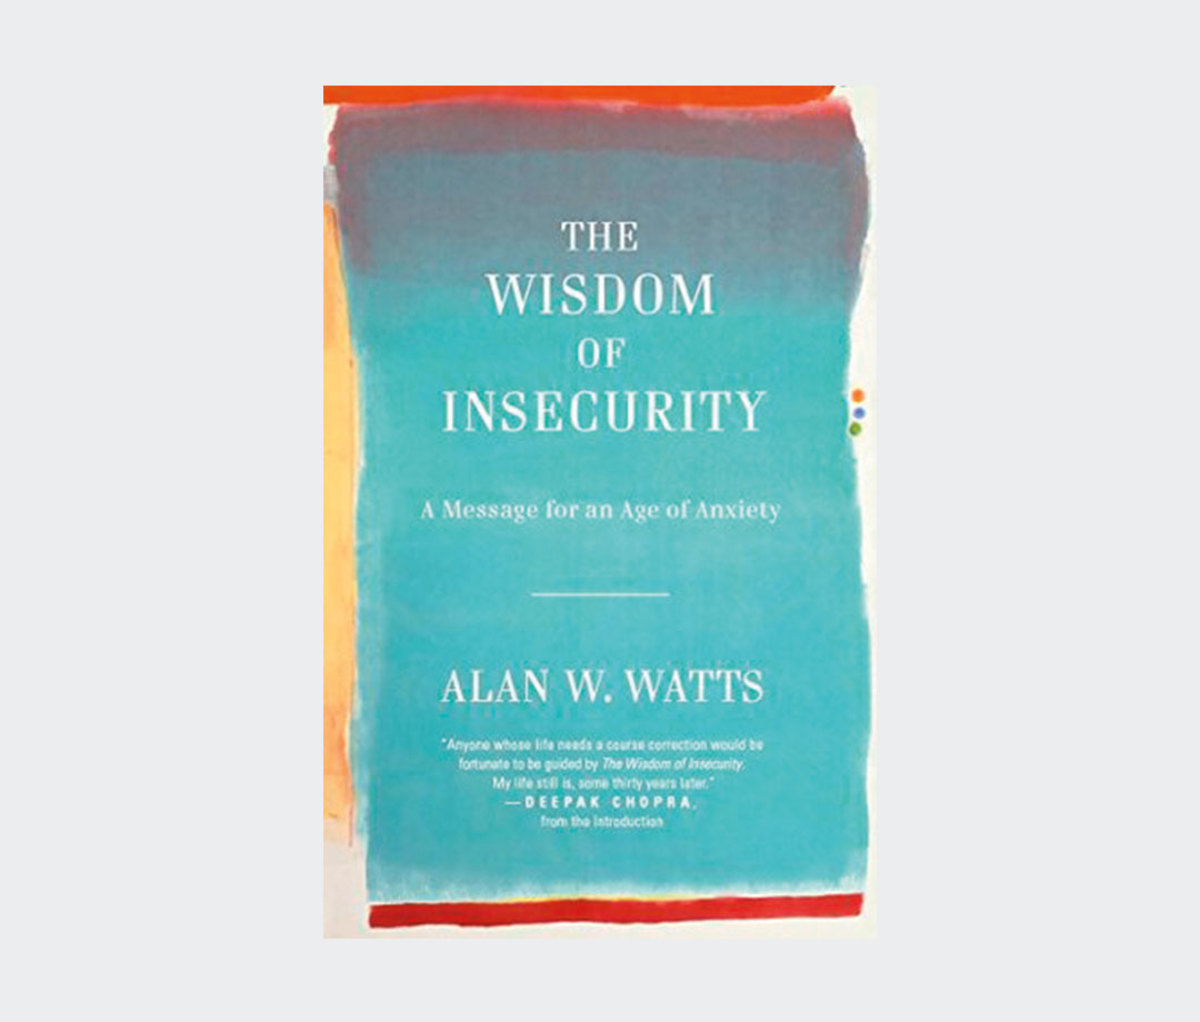 'The Wisdom of Insecurity' by Alan Watts